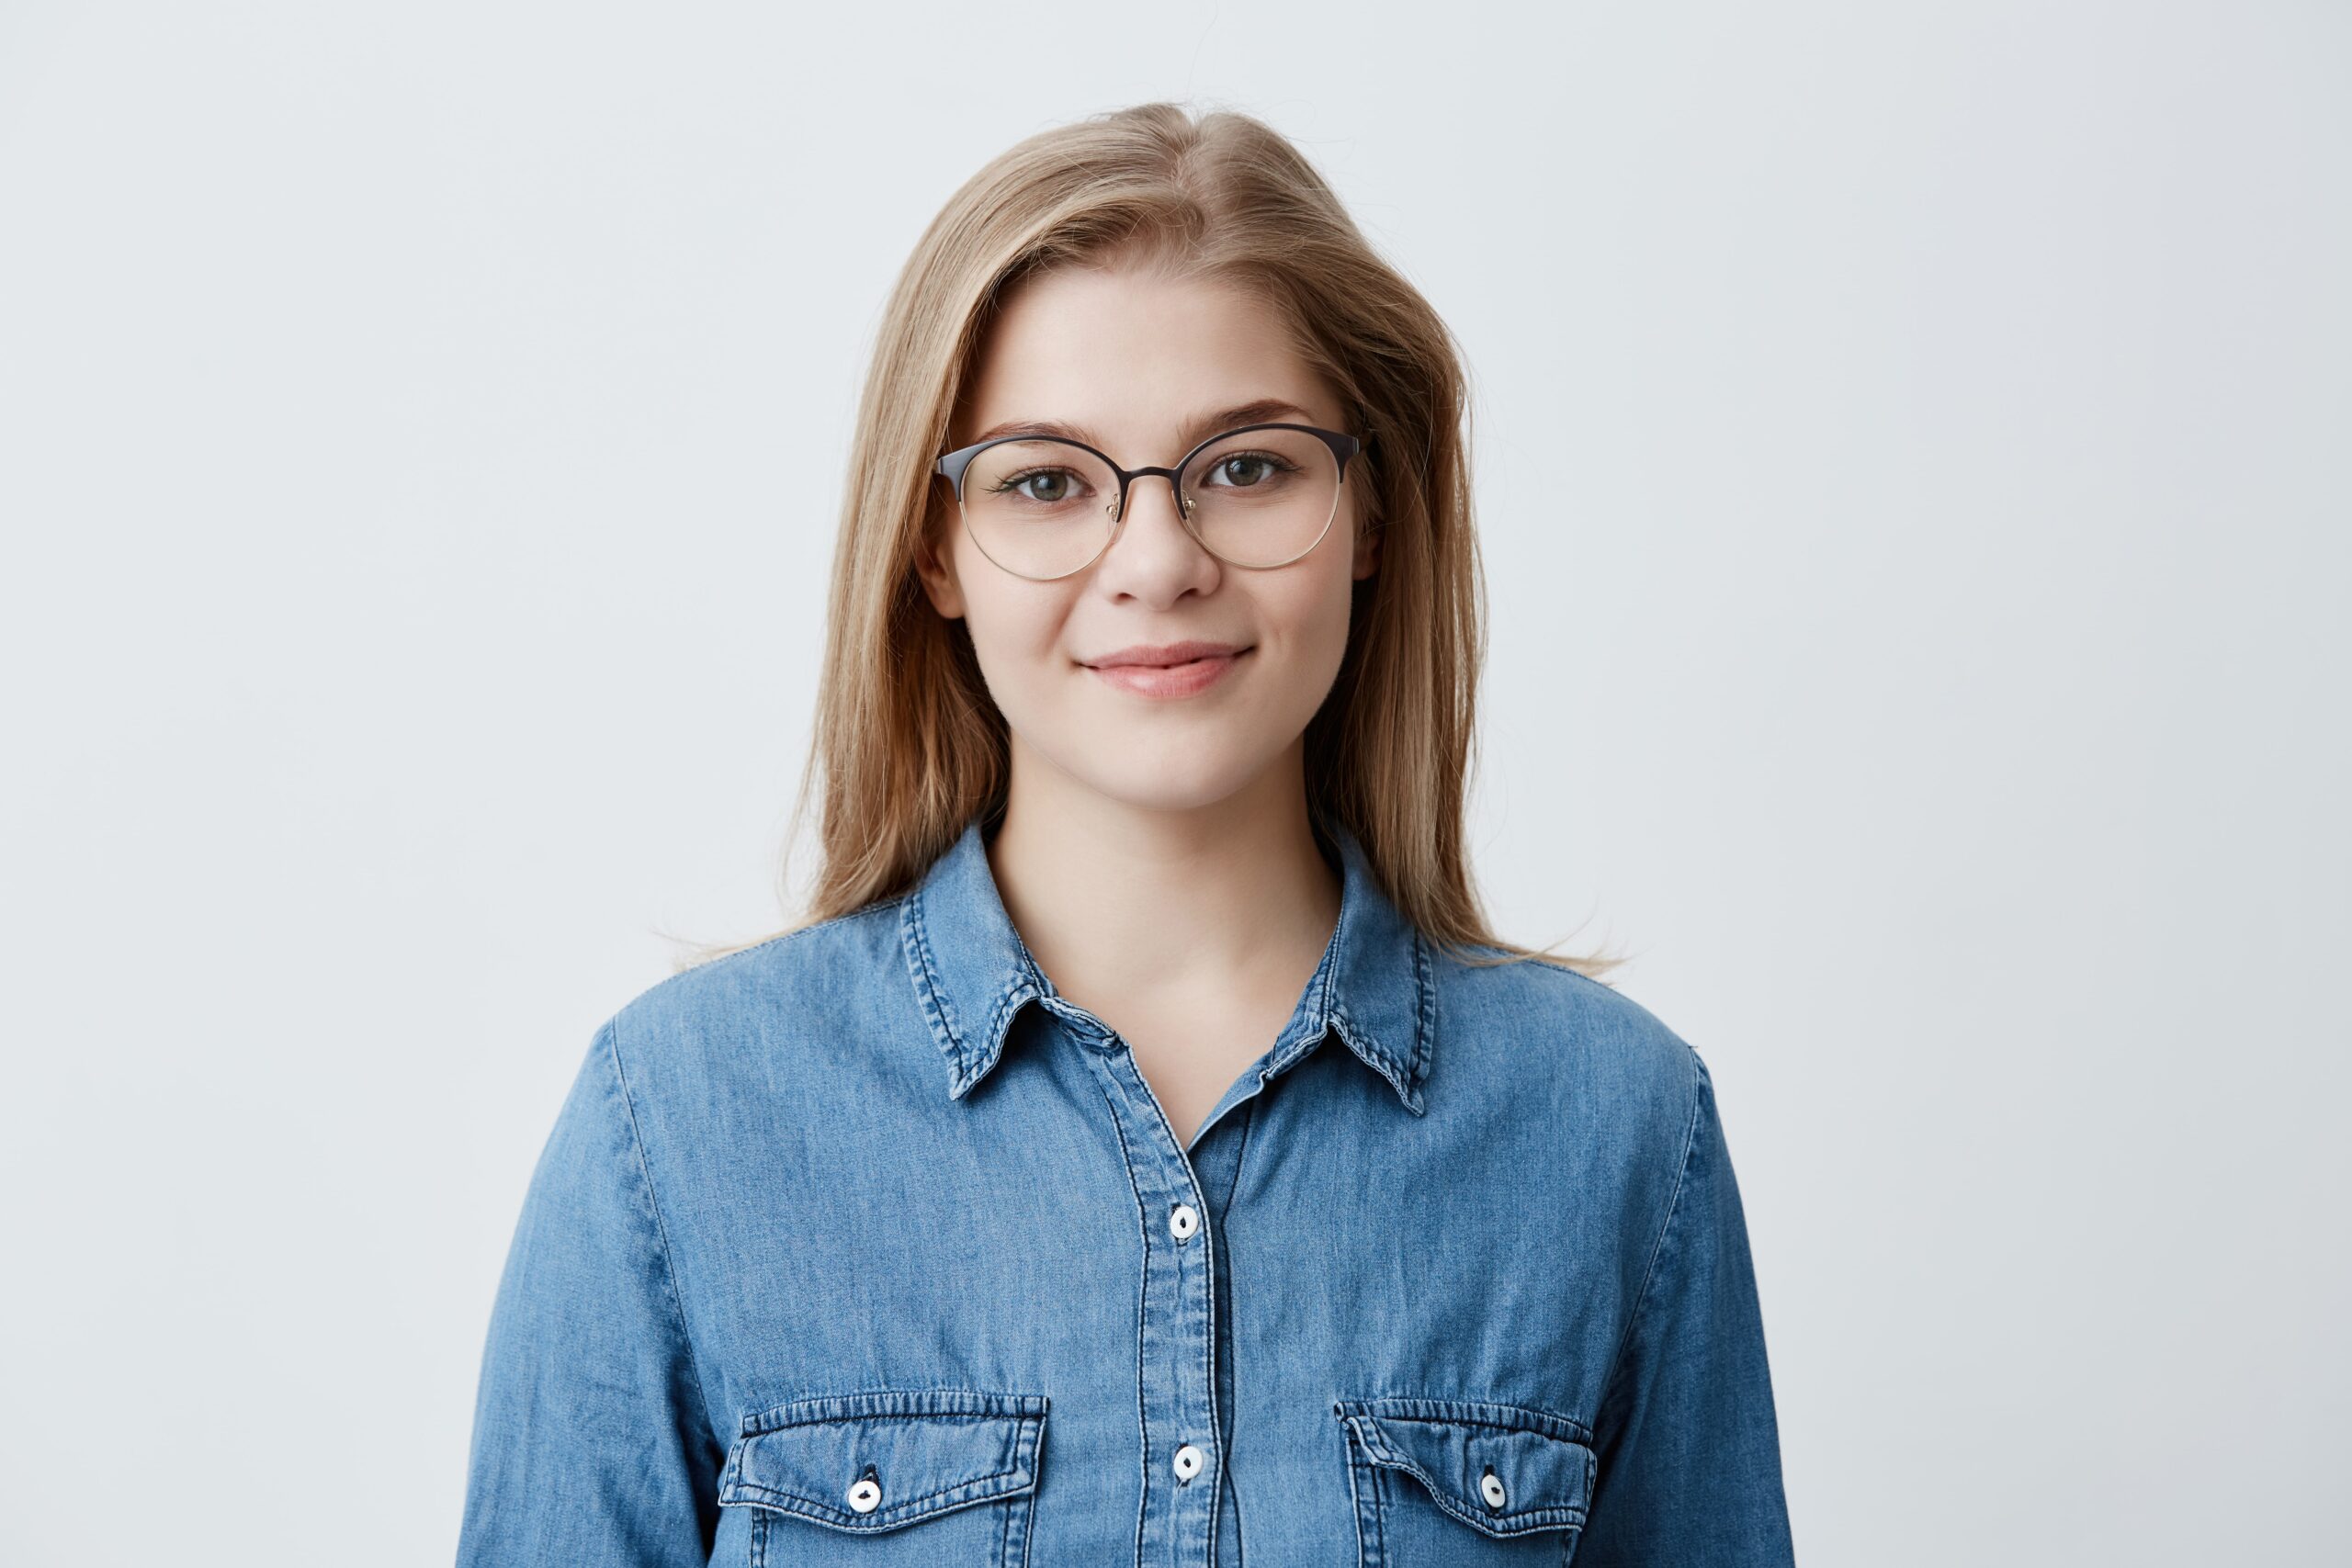 horizontal portrait smiling happy young pleasant looking female wears denim shirt stylish glasses with straight blonde hair expresses positiveness poses min scaled